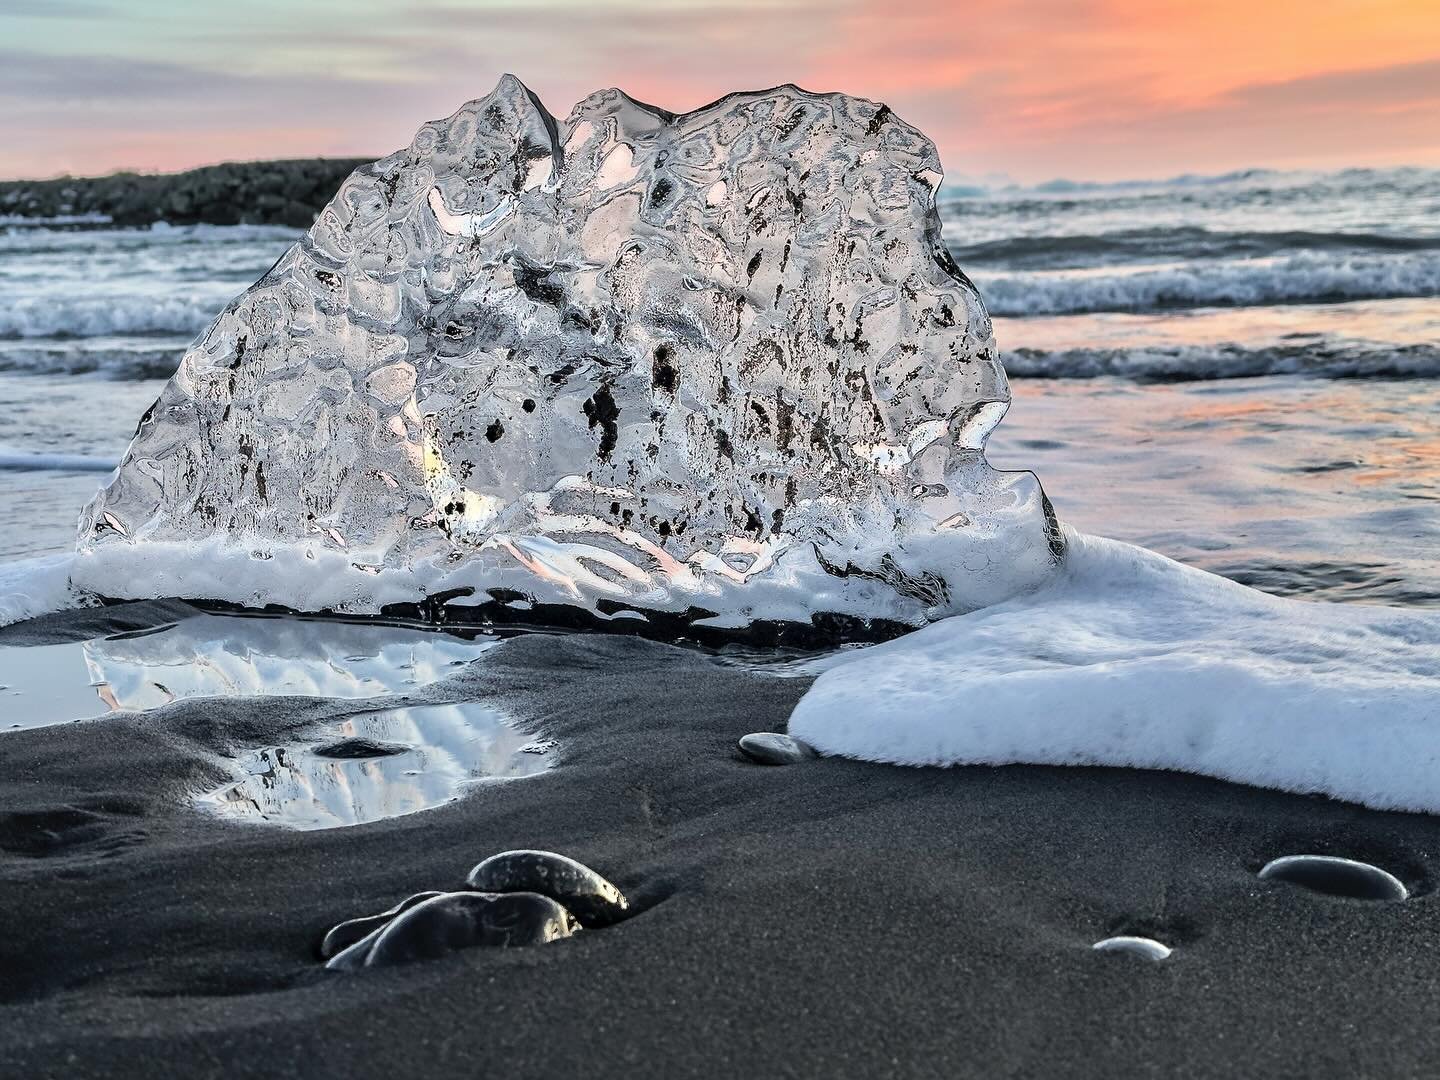 From our &quot;Colorscapes&quot; Exhibit gallery, &quot;Frozen Jewel at Diamond Beach&quot; by Nicole Mordecai. Congratulations to the winners and all the photographers whose work we&rsquo;re honored to include in this show!

#fineartphotography #col